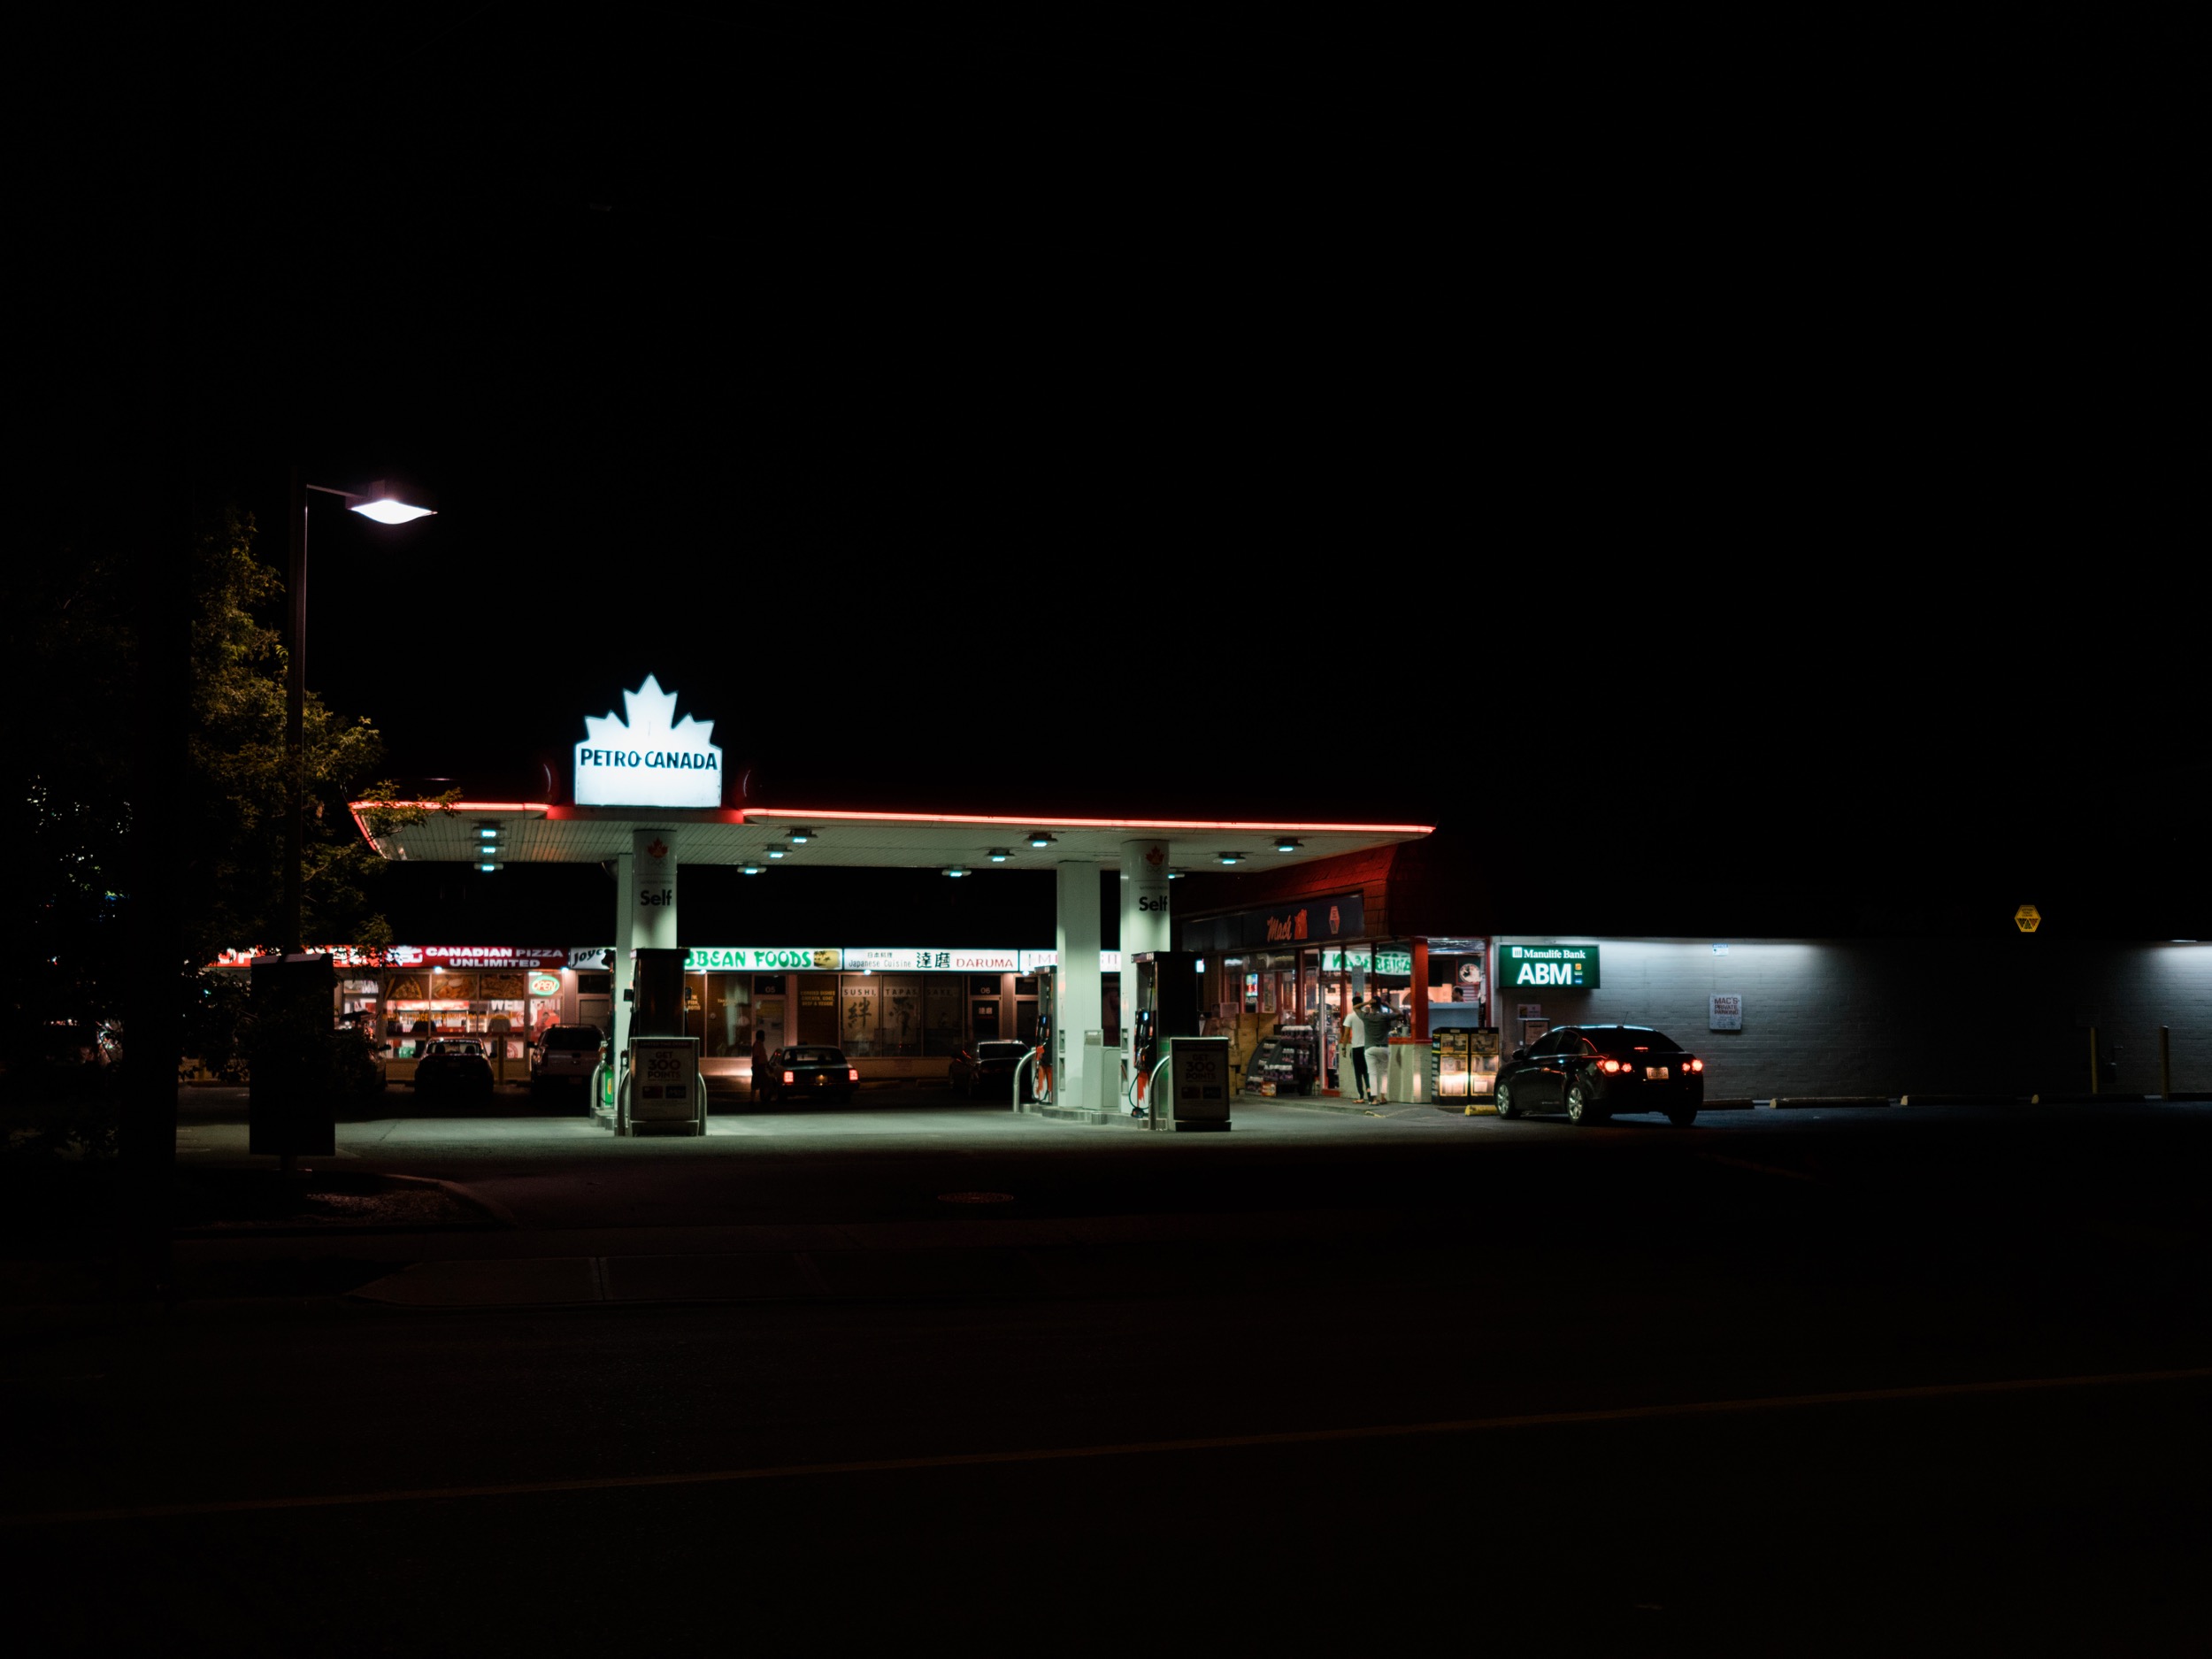  There are two gas stations along my typical photo walk route so it's easy to see what's up at both.&nbsp; 